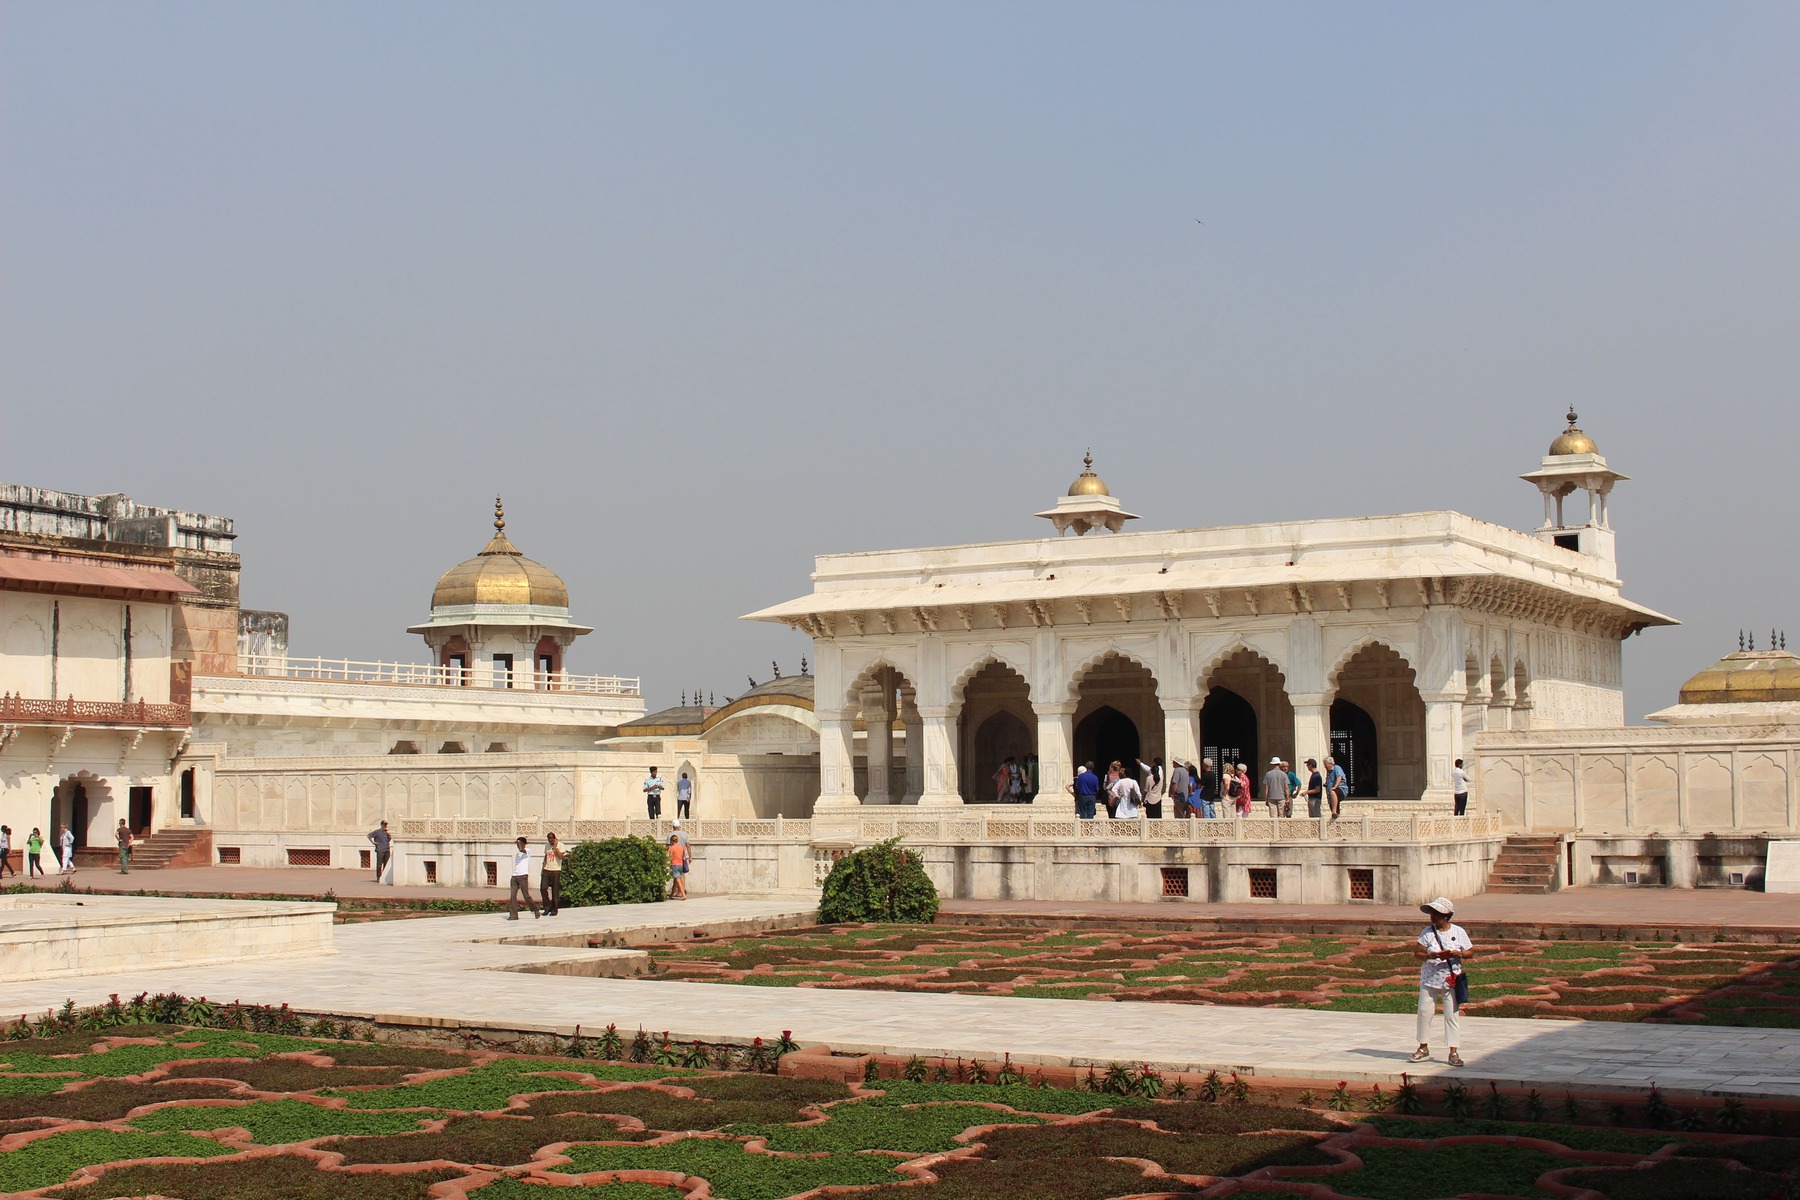 http://s6.picofile.com/file/8197385684/7233739_Visit_the_Agra_Fort_Agra.jpg